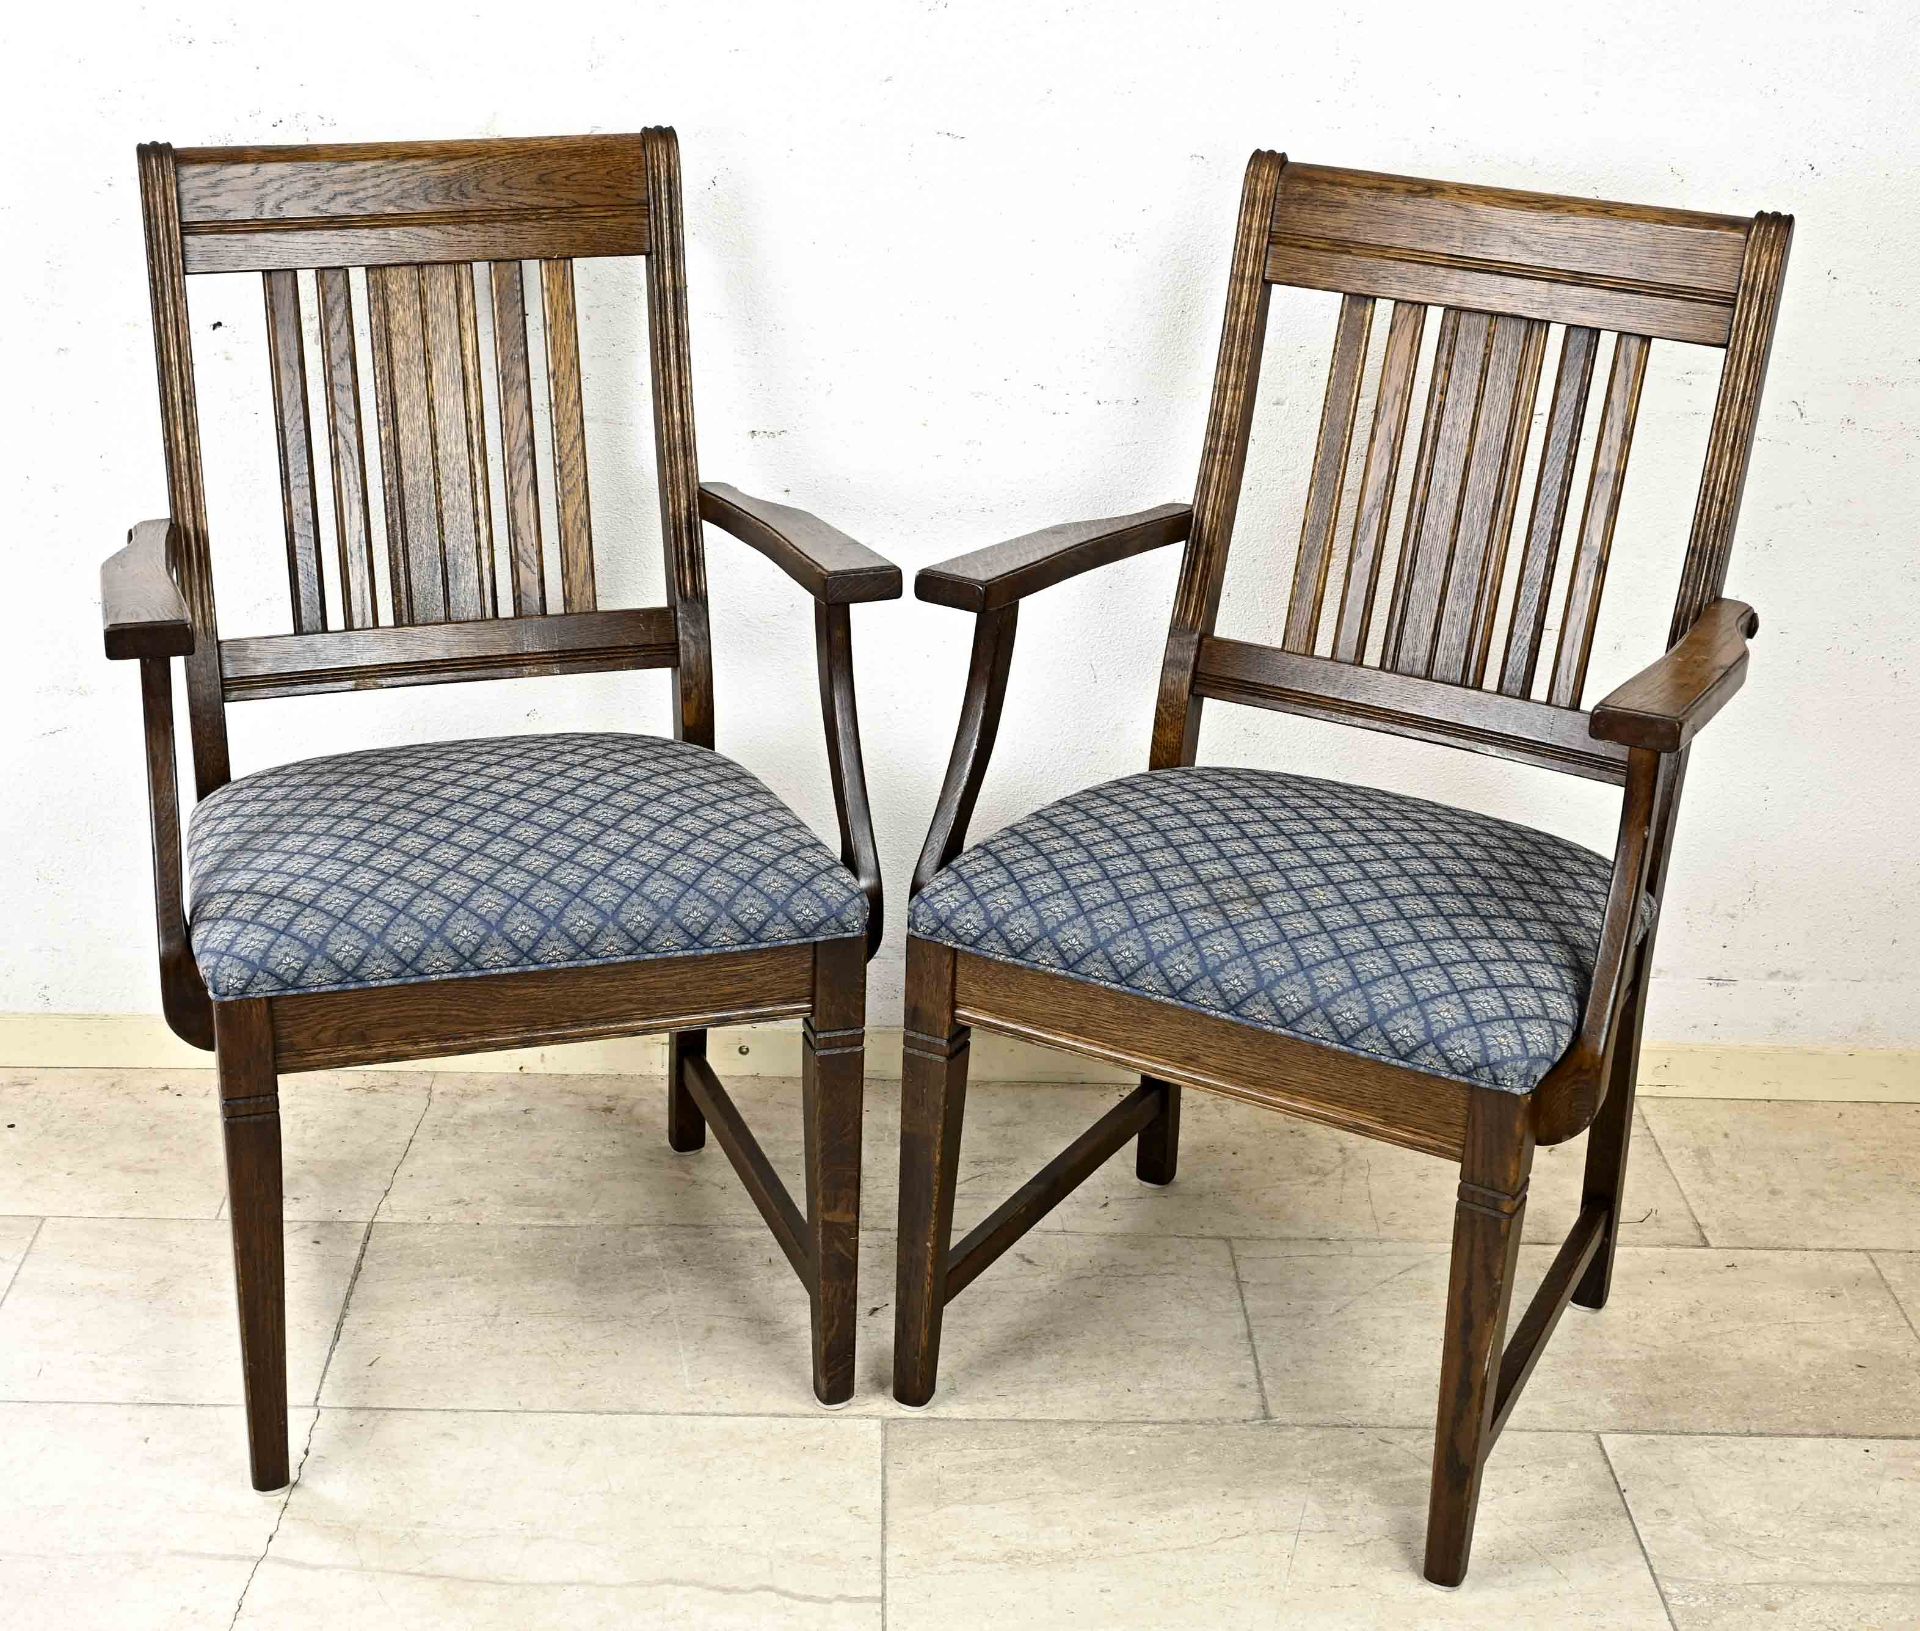 Set of 2 armchairs, circa 1920, solid oak, upholstered seat with blue diamond cover, 98 x 61 x 53 cm